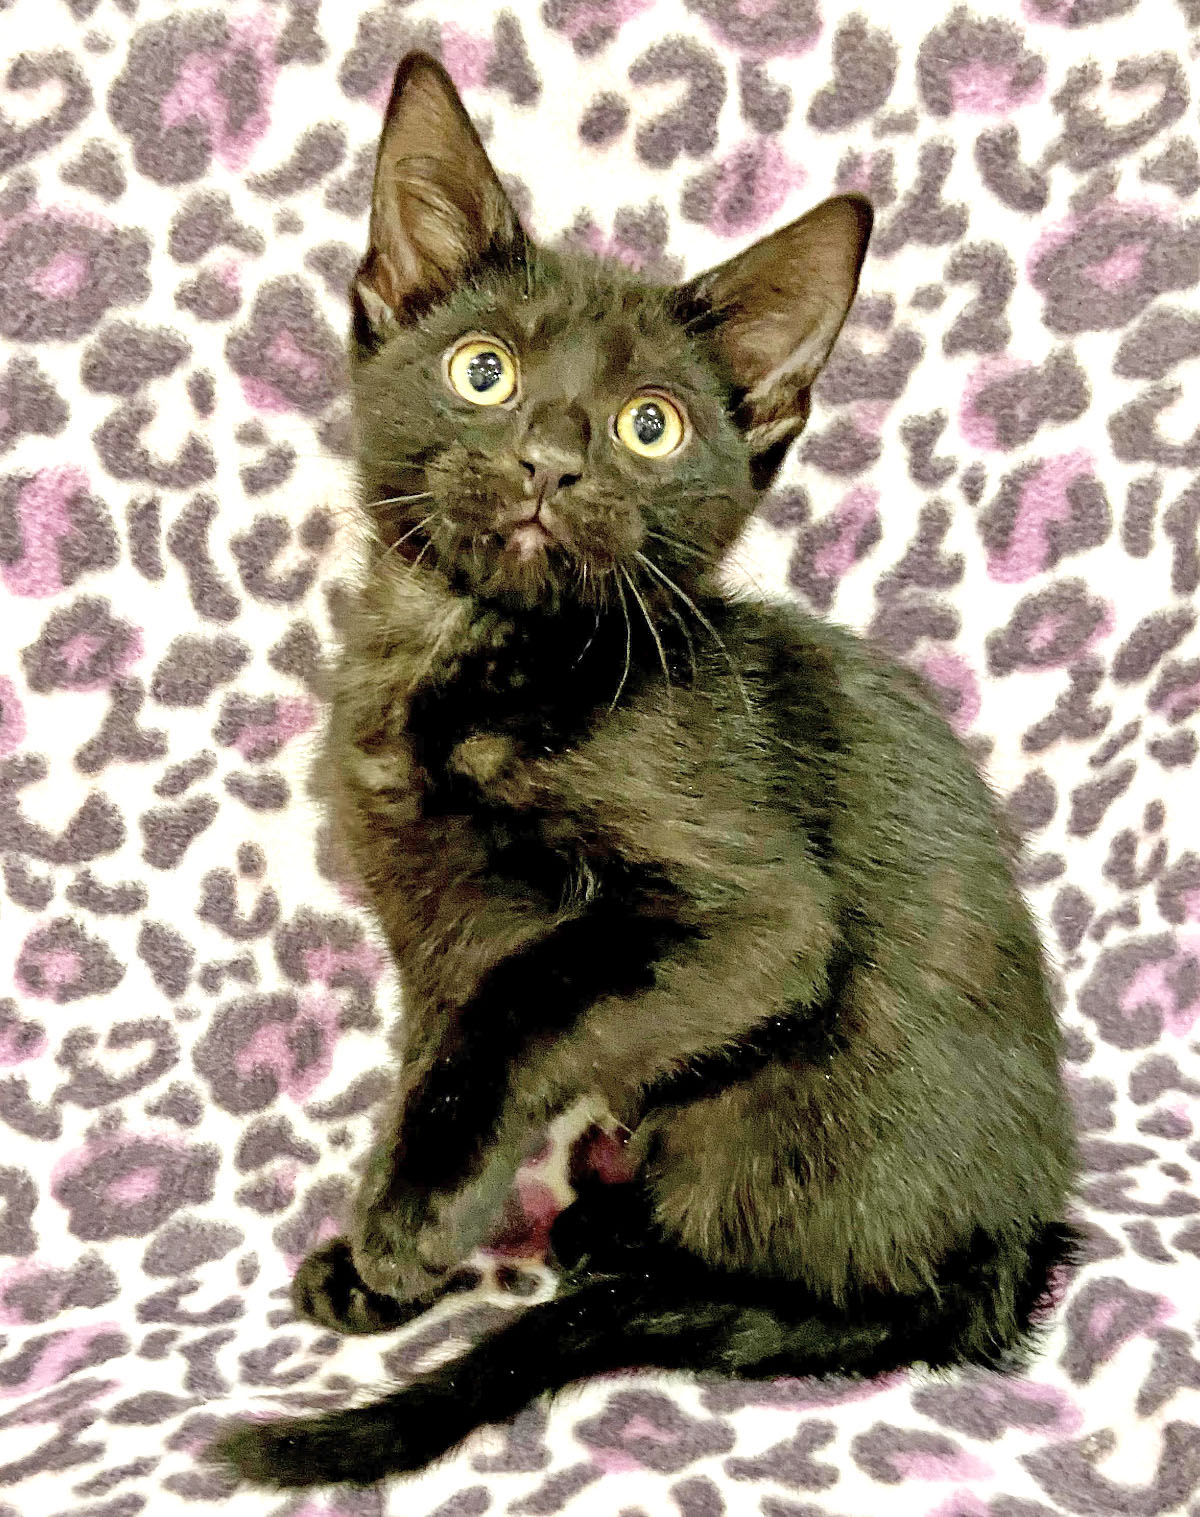 Happy Cats Haven – Pet of the Week: Hi, I’m Morpheus, an adorable little boy with sleek black fur and big yellow eyes. I was born at Happy Cats after my mama was found ready to have kittens and trying to survive outside. My brothers and I are big kittens now, so we’re looking to find homes of our own! I love hanging with hoomans, especially when we get to cuddle. I’ll do great in a calmer home with older kids and other feline-friendly cats. I might be OK with a cat-experienced dog if I get a gentle introduction! I’m about 2 and a half months old, and you can adopt me for $140, which includes my neuter, vaccinations, microchip, food and litter starter kit, and a free well-kitty checkup. Happy Cats Haven: 719-362-4600, 327 Manitou Ave. Adoptions by appointment only until further notice.www.HappyCatsHaven.org, www.Facebook.com/HappyCatsHaven.